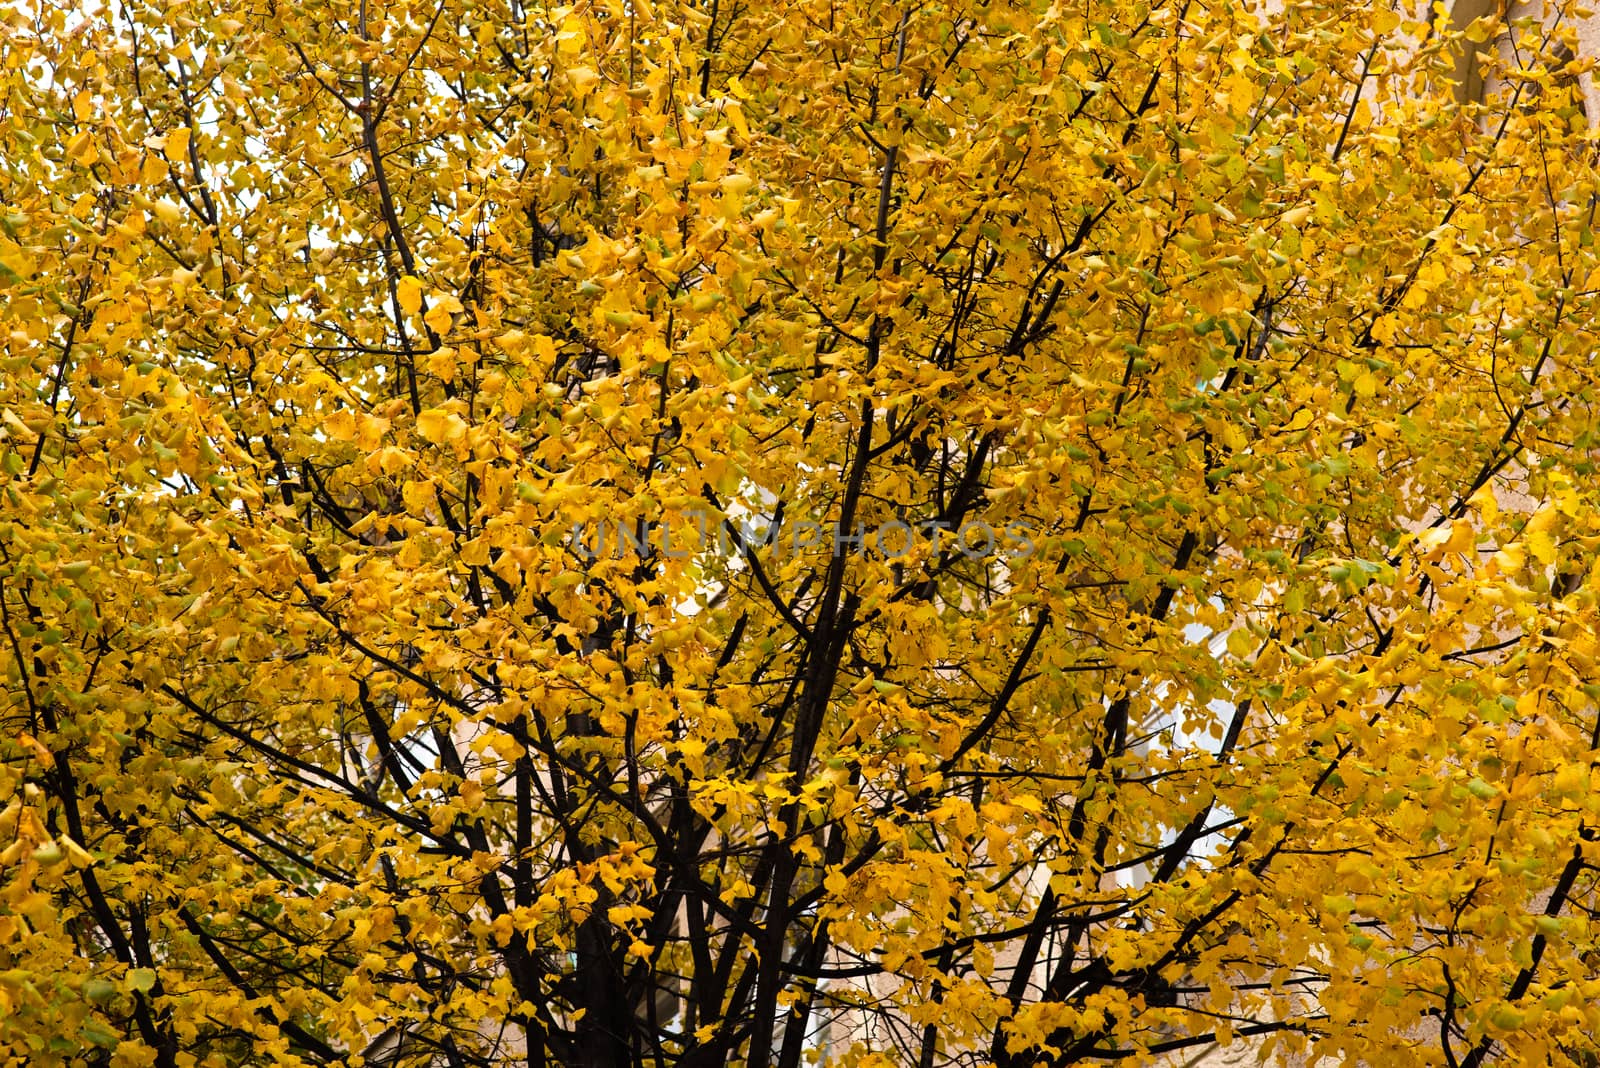 Treetop with yellow leaves in a park during autumn by gonzalobell